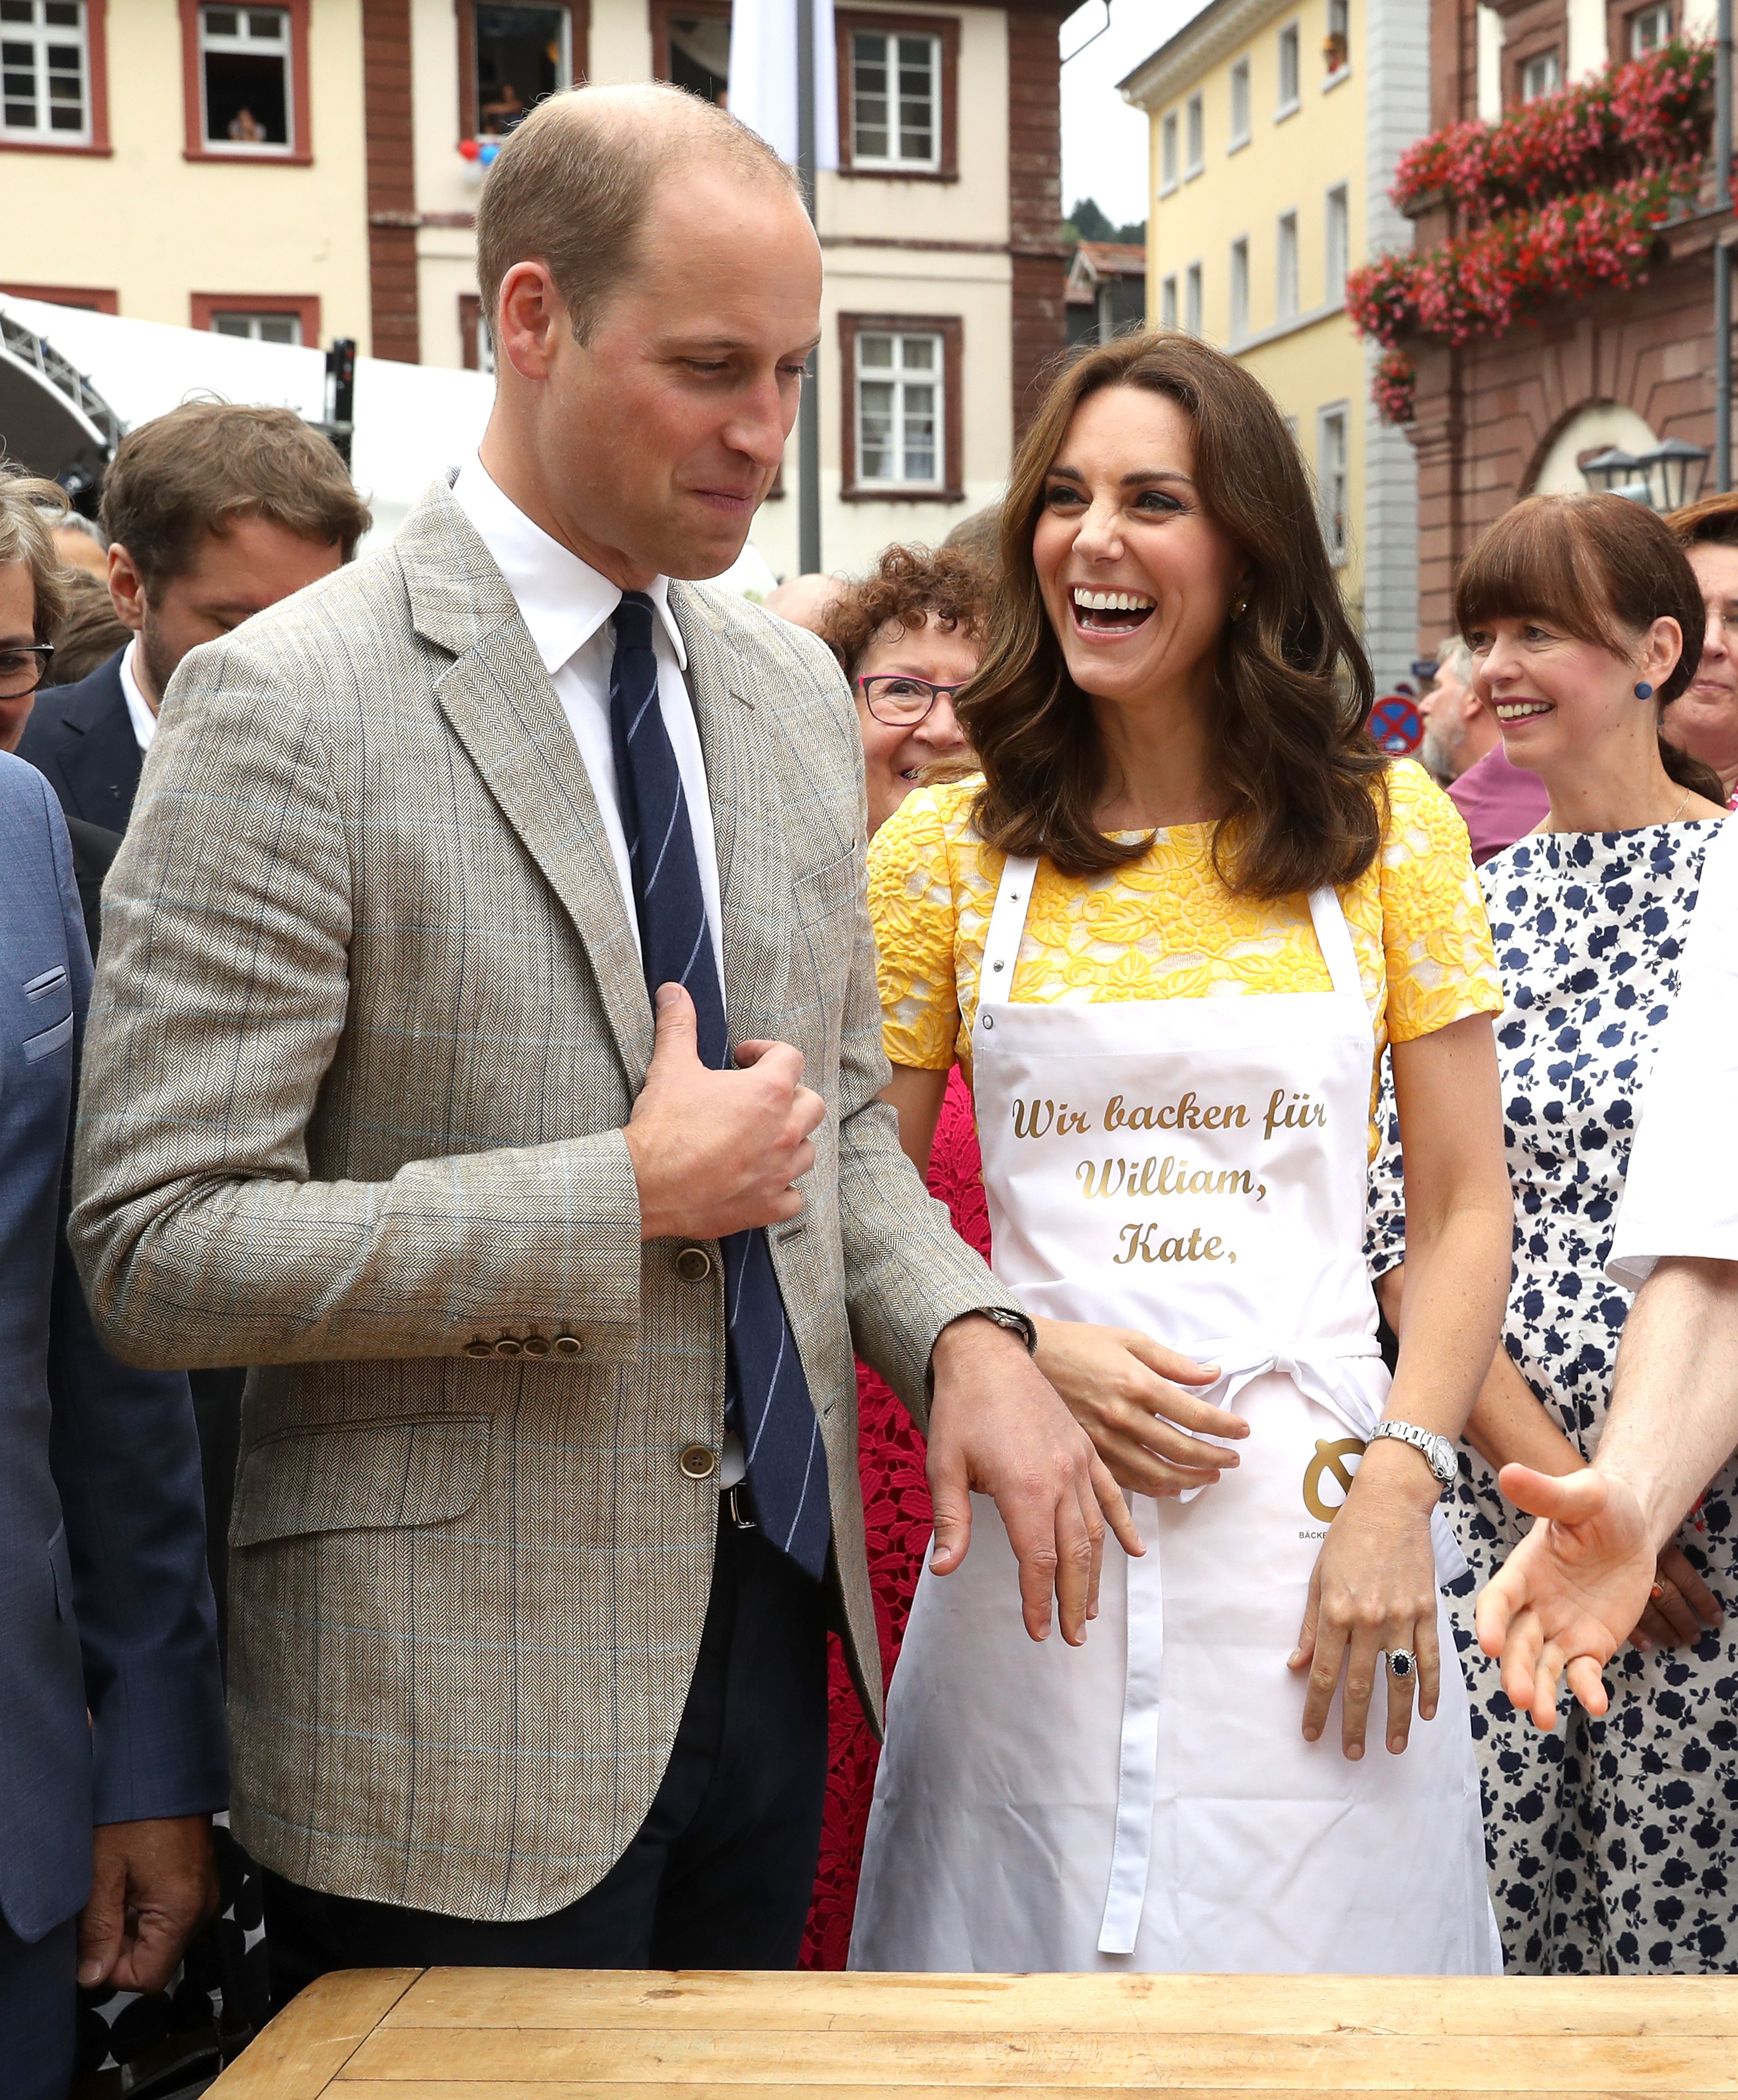 Prince William, Duke of Cambridge and Catherine, Duchess of Cambridge attempt to make pretzels during a tour of a traditional German market in the Central Square on day 2 of their official visit to Germany on July 20, 2017 in Heidelberg, Germany